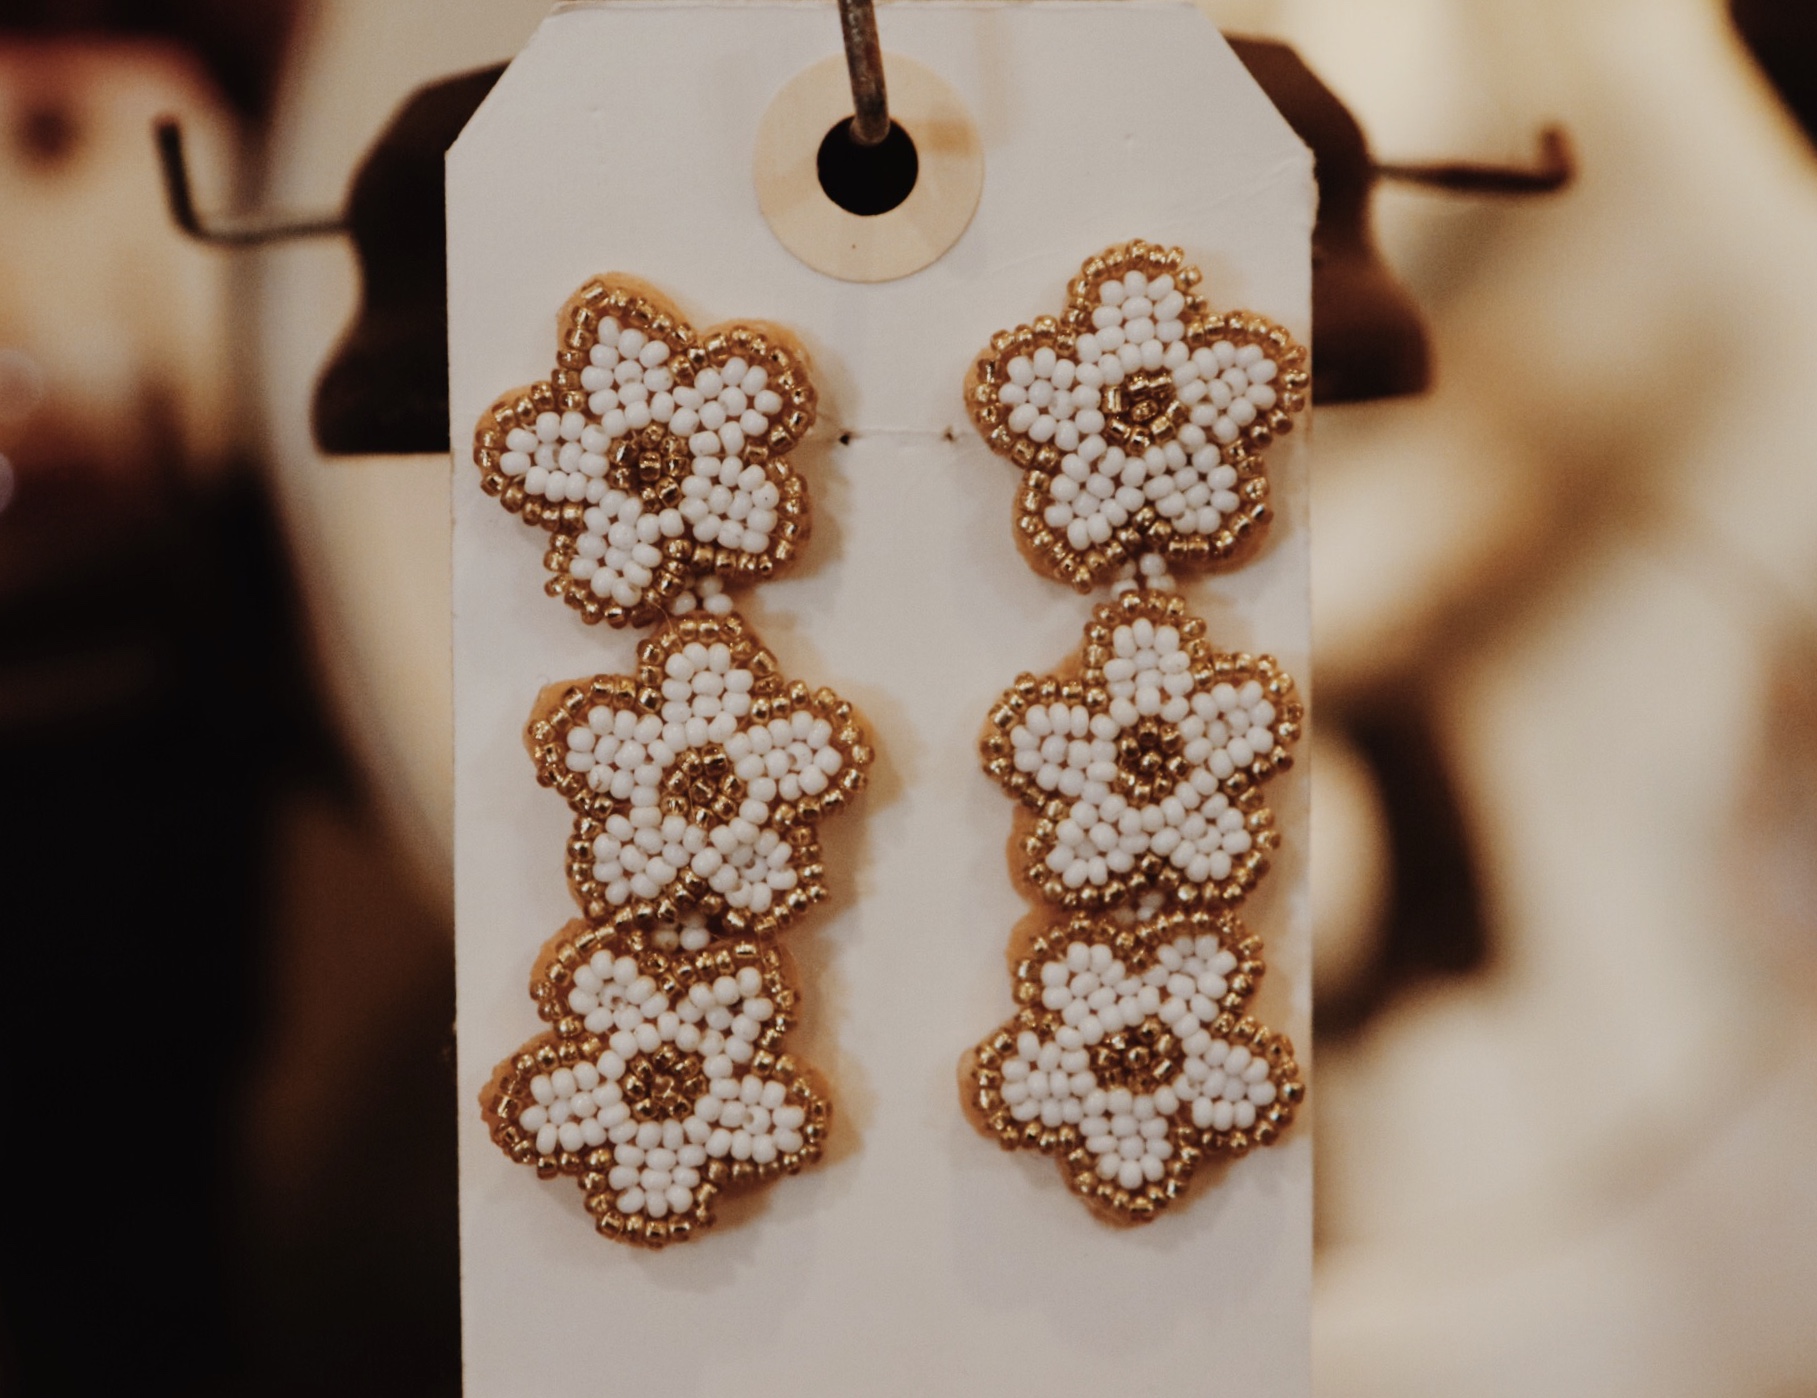 Beaded Flower Earrings, these earrings are composed of white and gold beaded daisies that dangle from one another. Measuring 2.75 inches long.